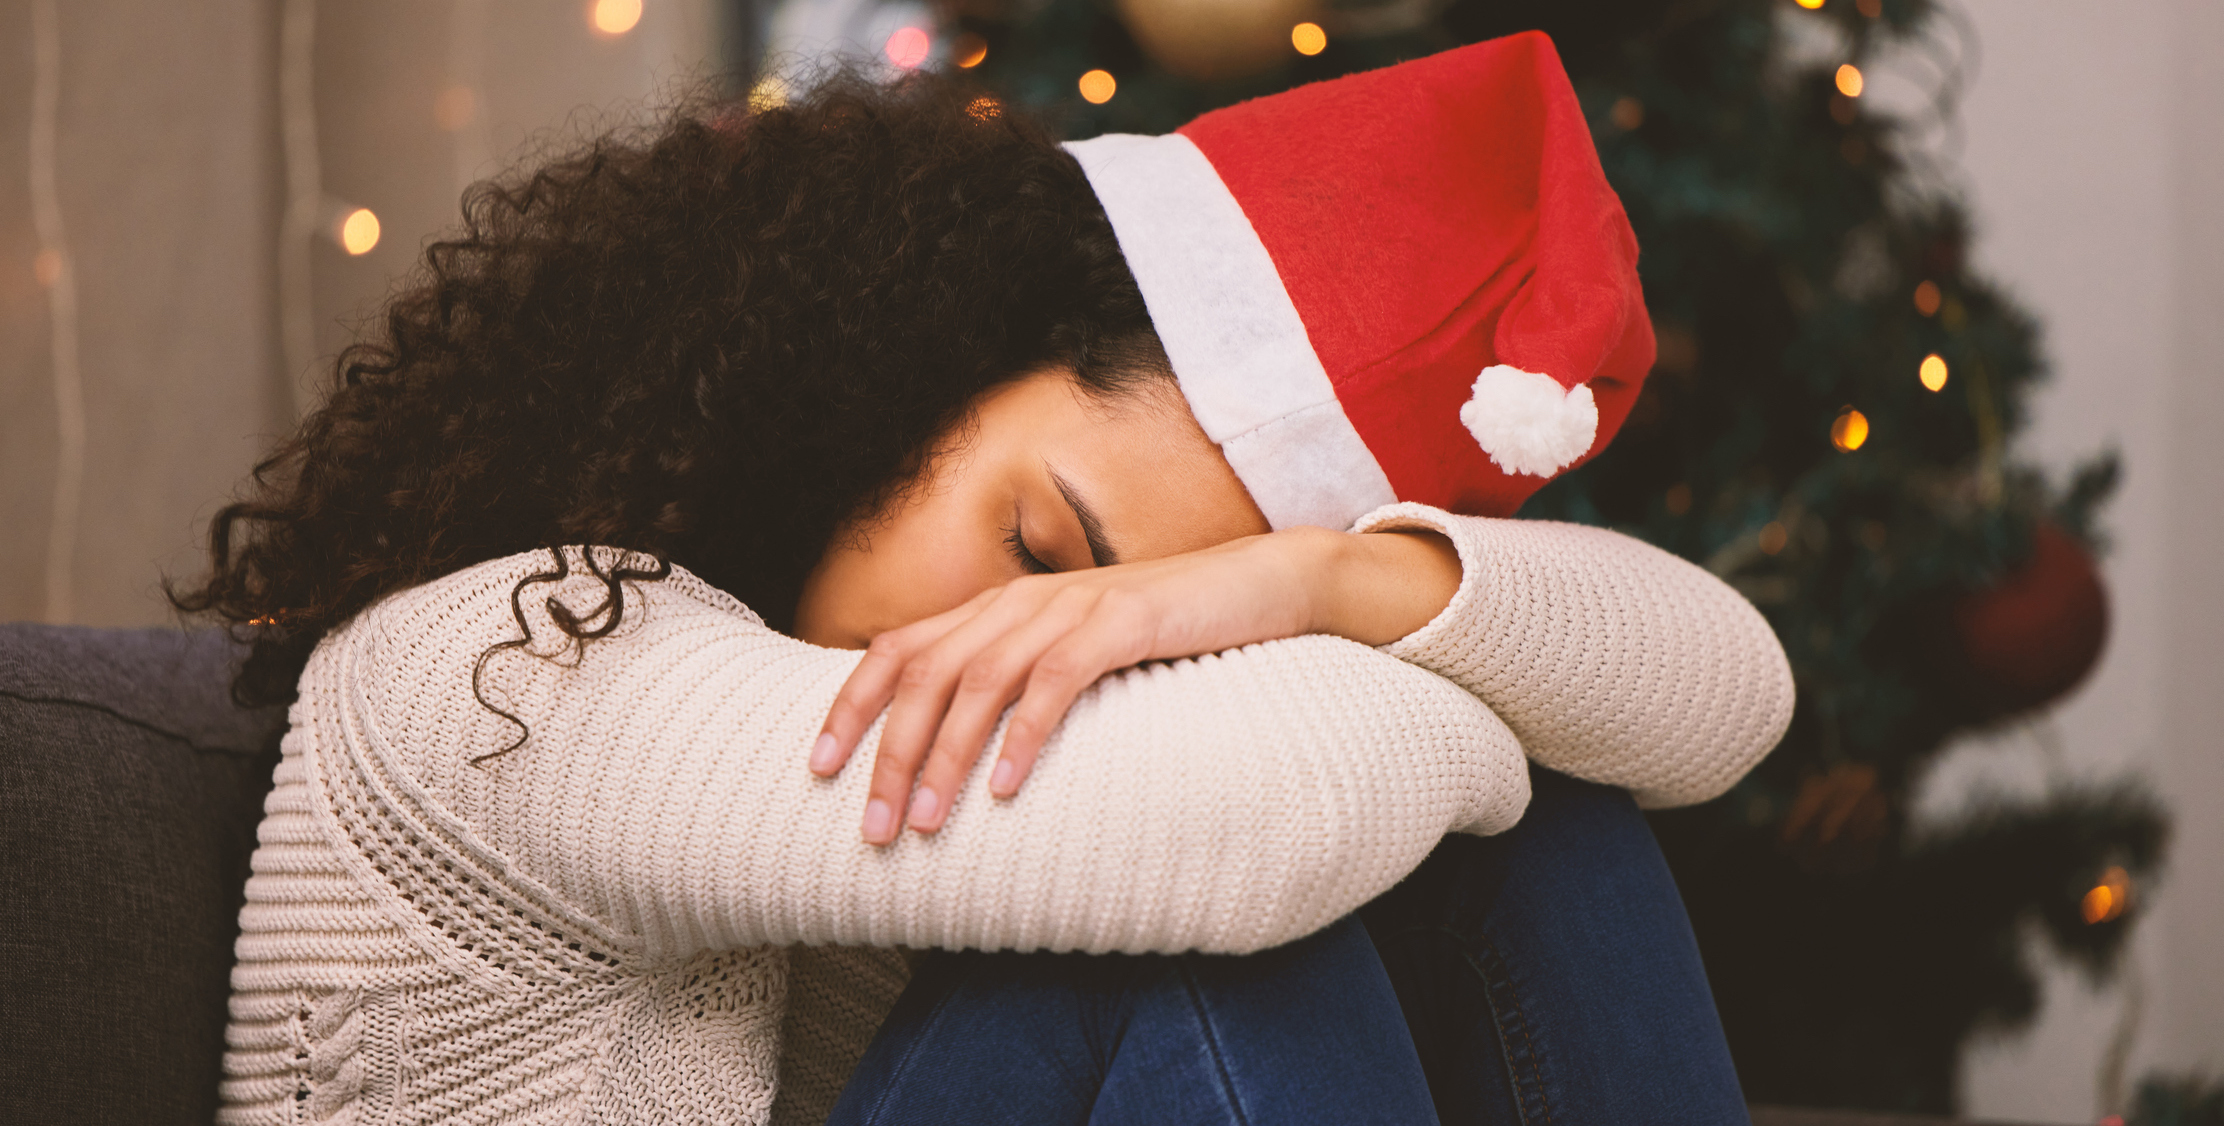 5 Tips for Navigating Grief During the Holiday Season